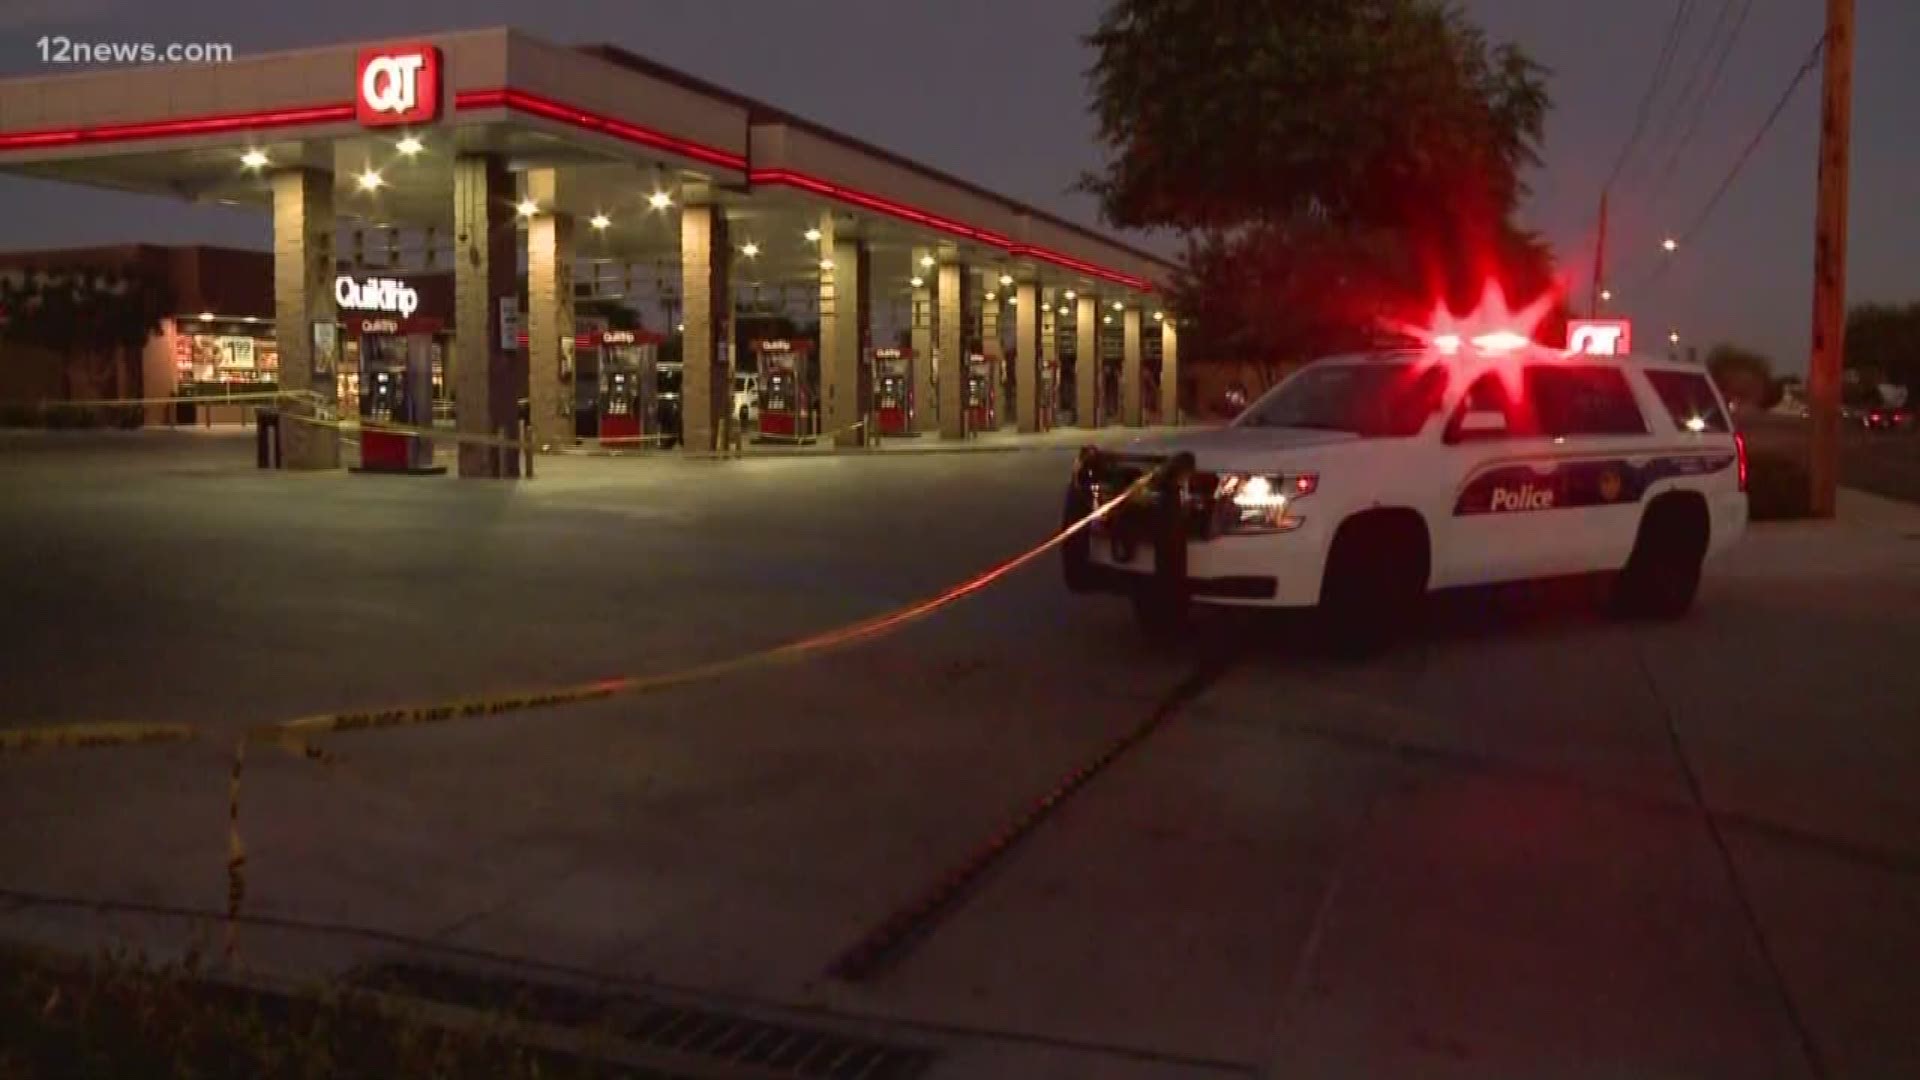 A gun went off inside the car, hitting the boy who was outside the car helping his father pump gas.